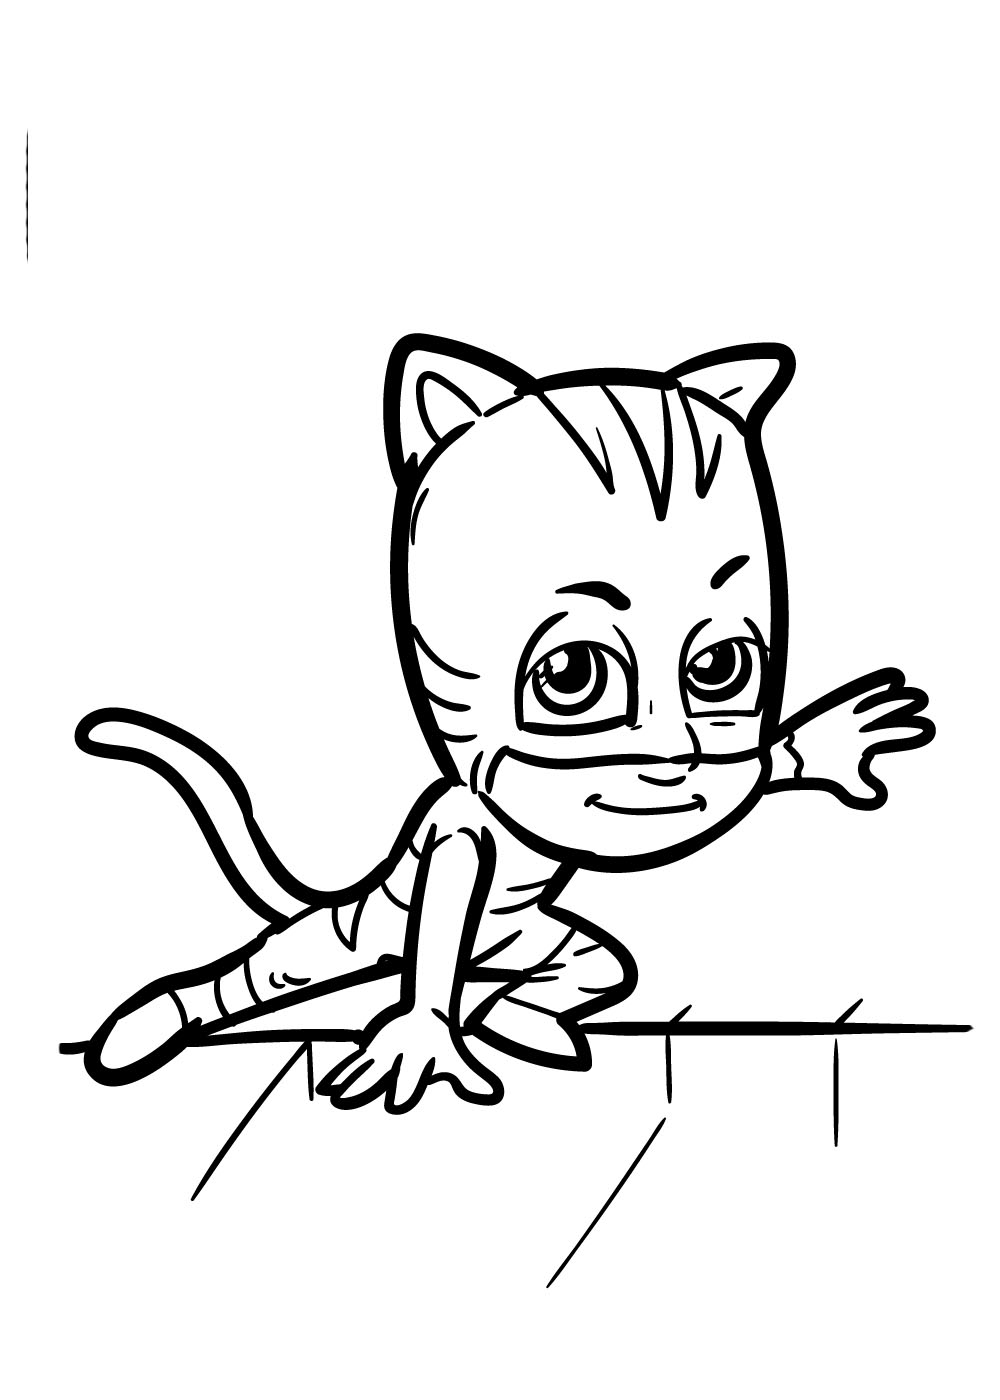 Catboy PJ Masks coloring pages - Coloring pages